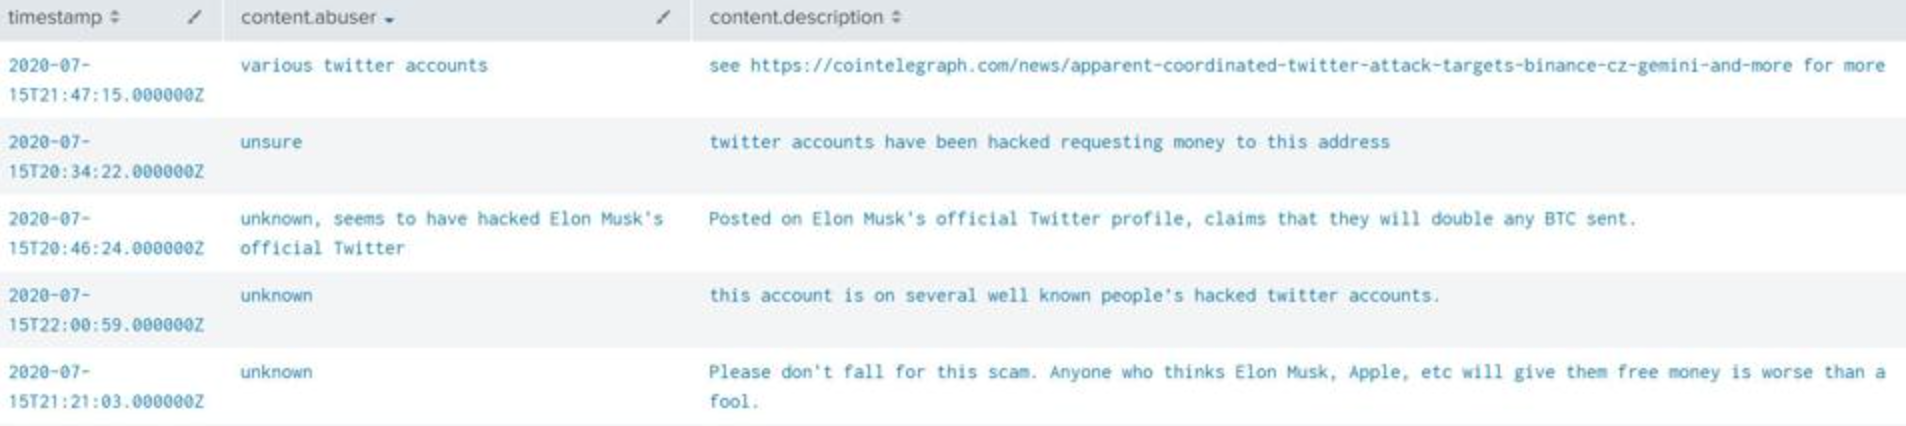 Twitter Hack Associated Addresses Bitcoinabuse Reports. Source: Bitcoinabuse data in Splunk